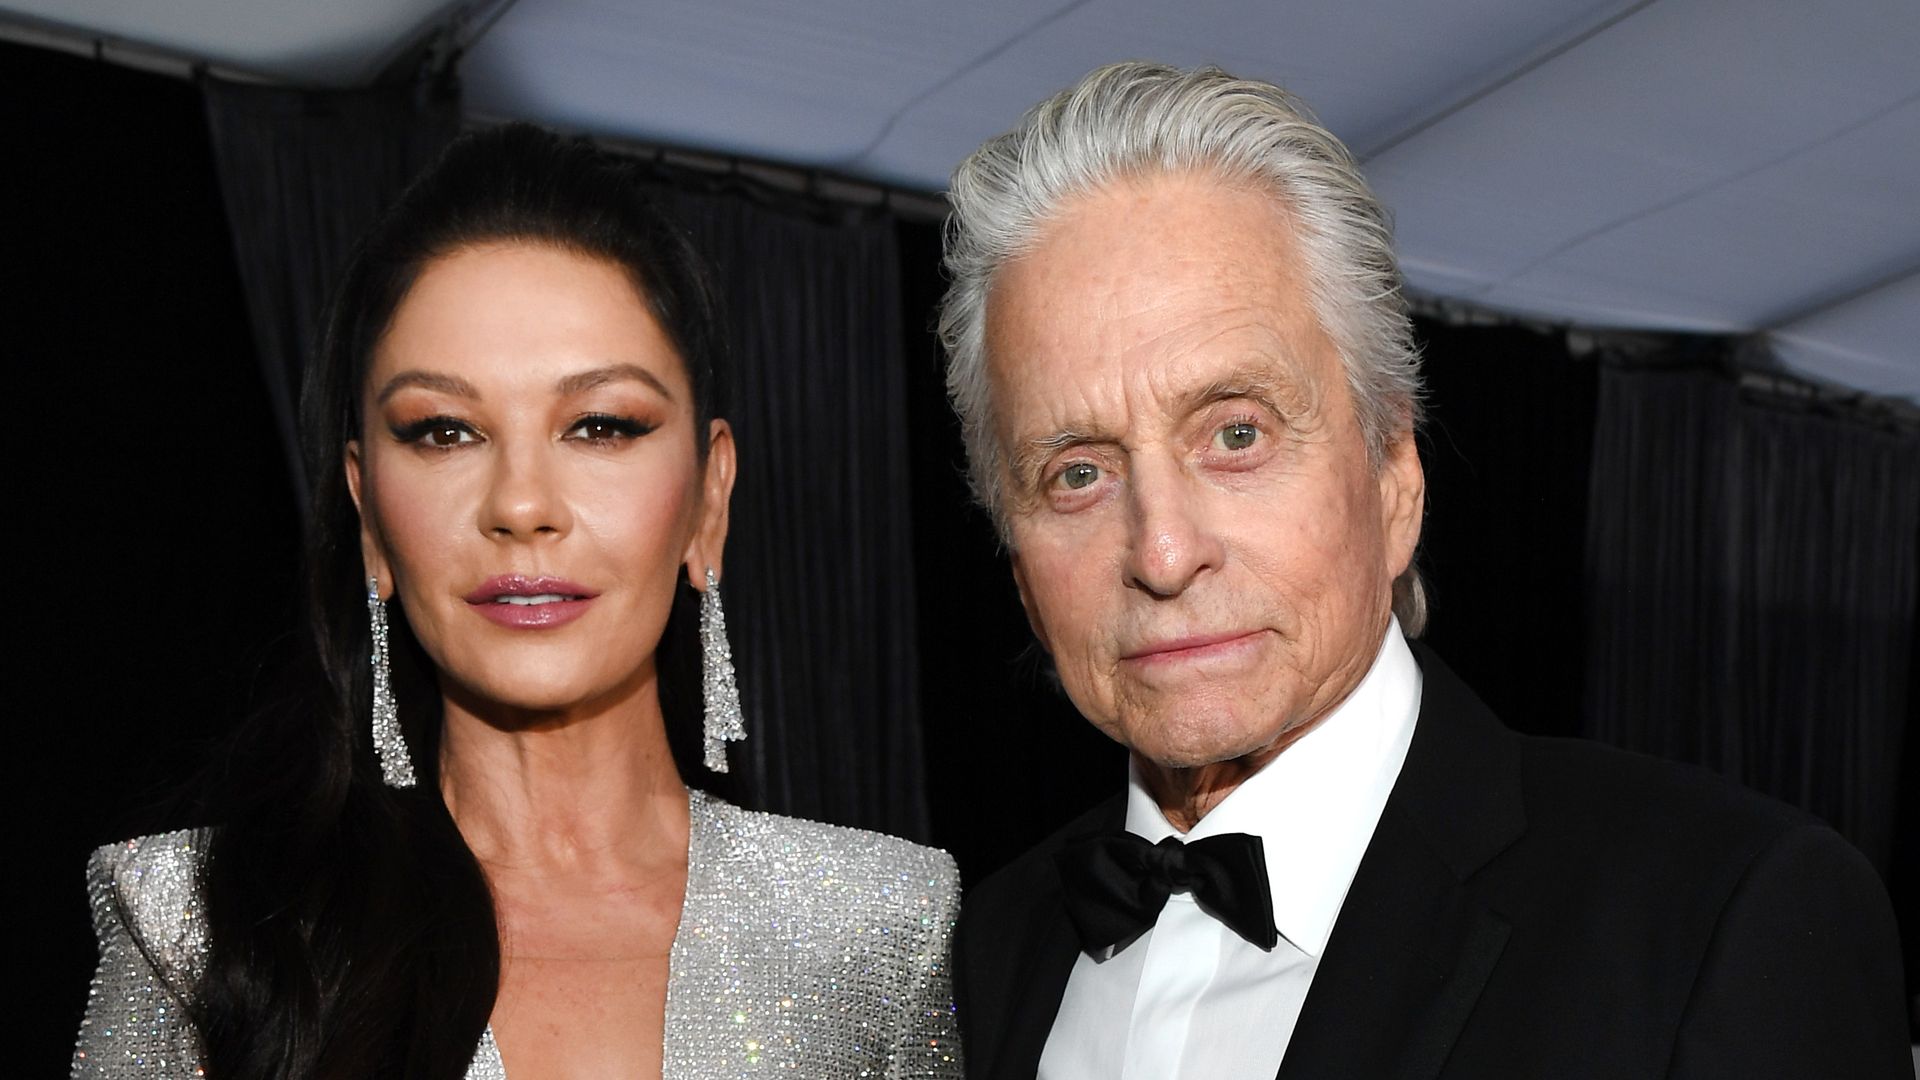 Catherine Zeta-Jones and Michael Douglas attend the 26th Annual Screen ActorsÂ Guild Awards at The Shrine Auditorium on January 19, 2020 in Los Angeles, California.